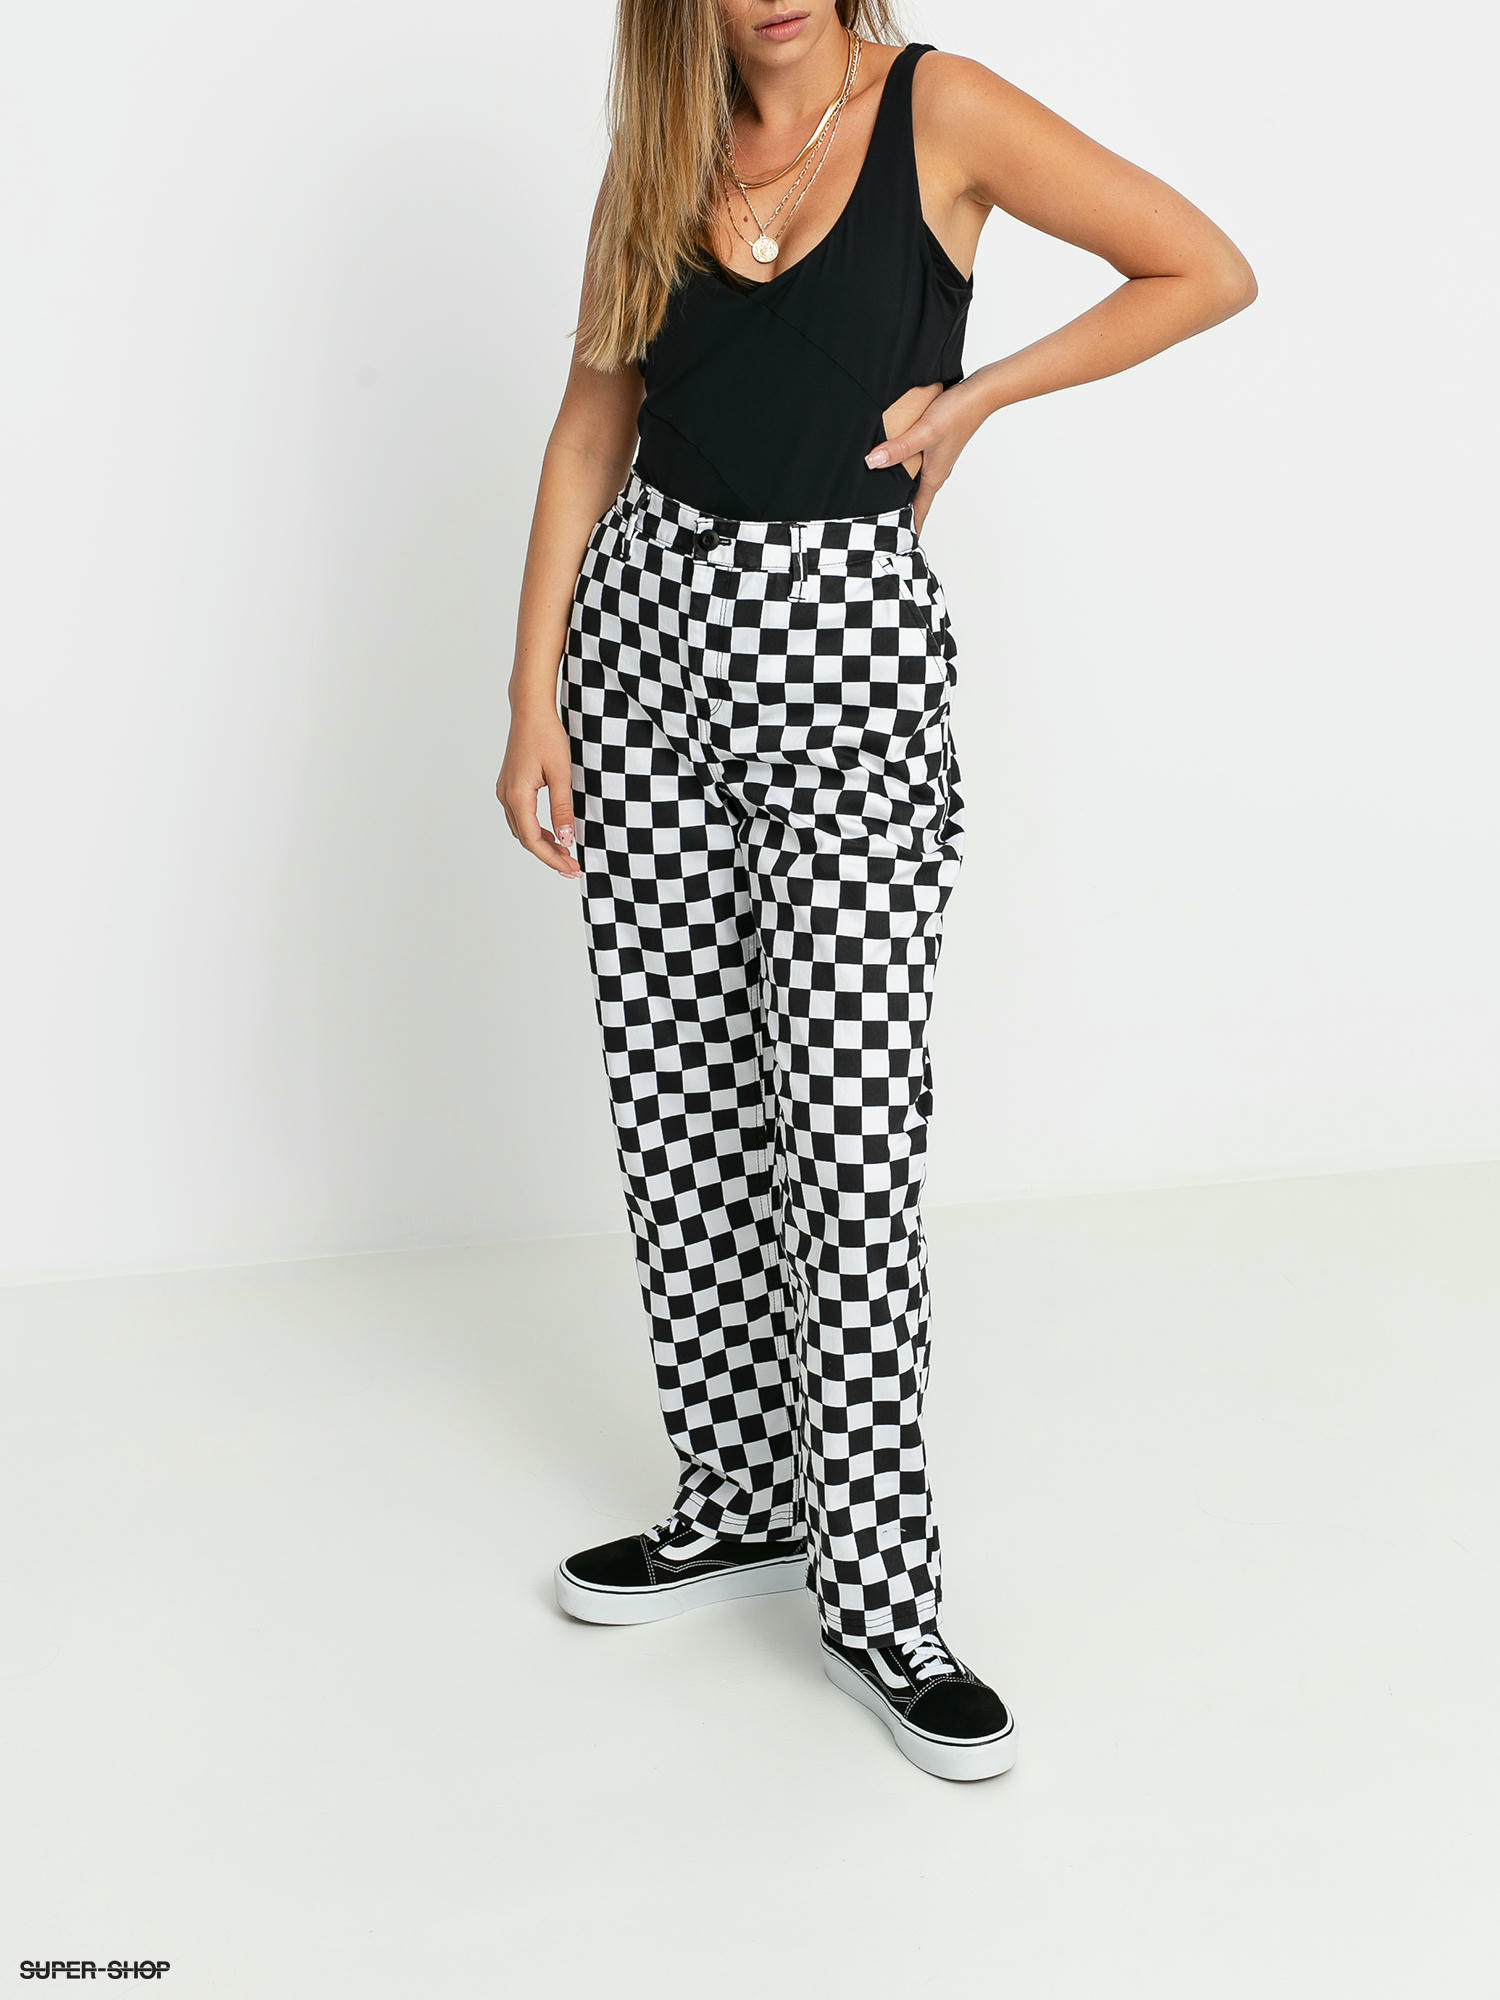 VANS Womens Checkerboard Track Pants Snap Sides Black Womens Size Small |  eBay